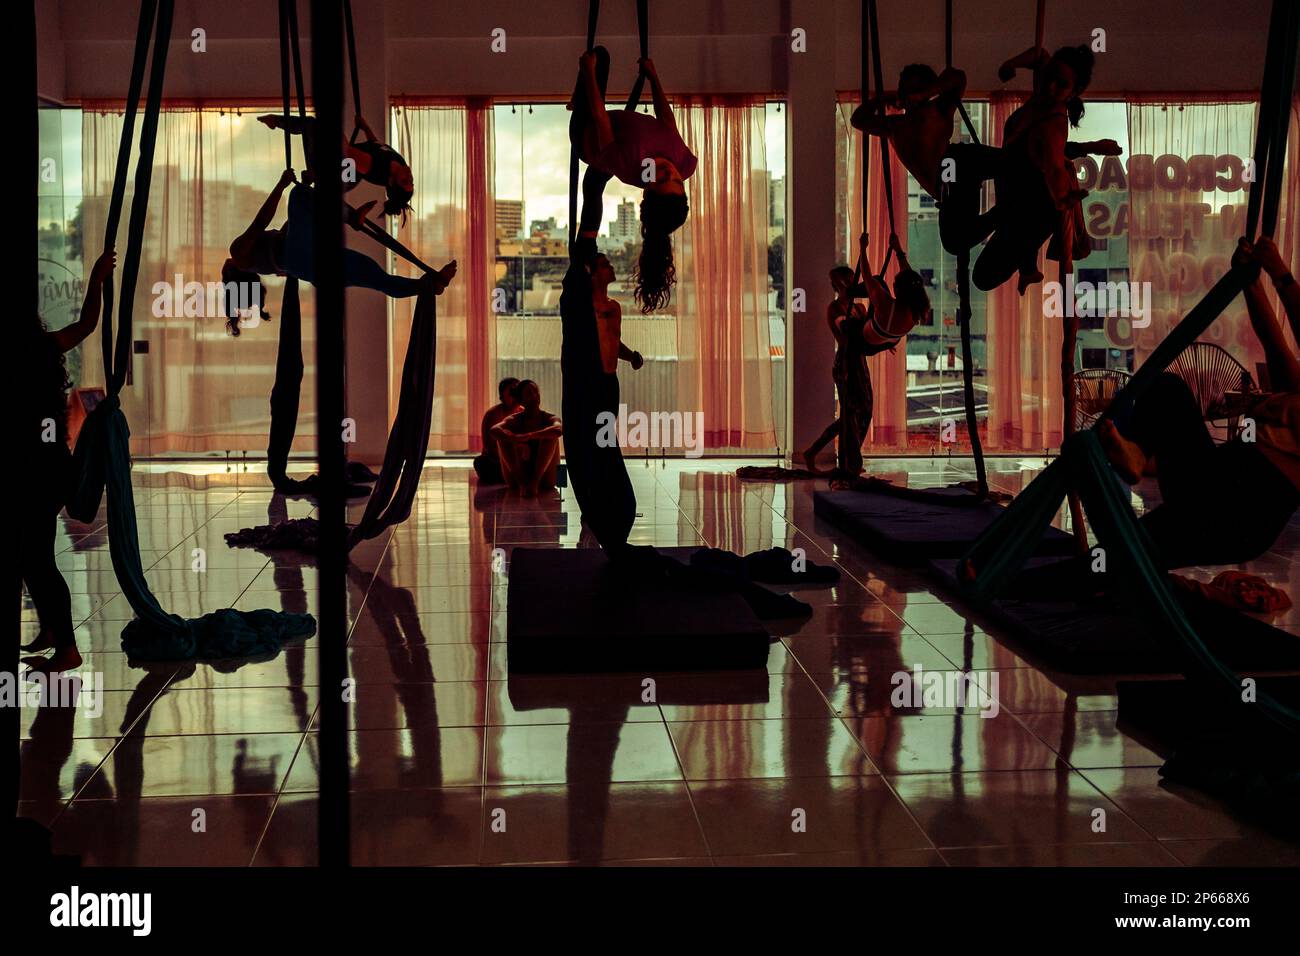 Colombian aerial dancers perform on aerial silks during a training session in the Oshana gym in Barranquilla, Colombia. Stock Photo